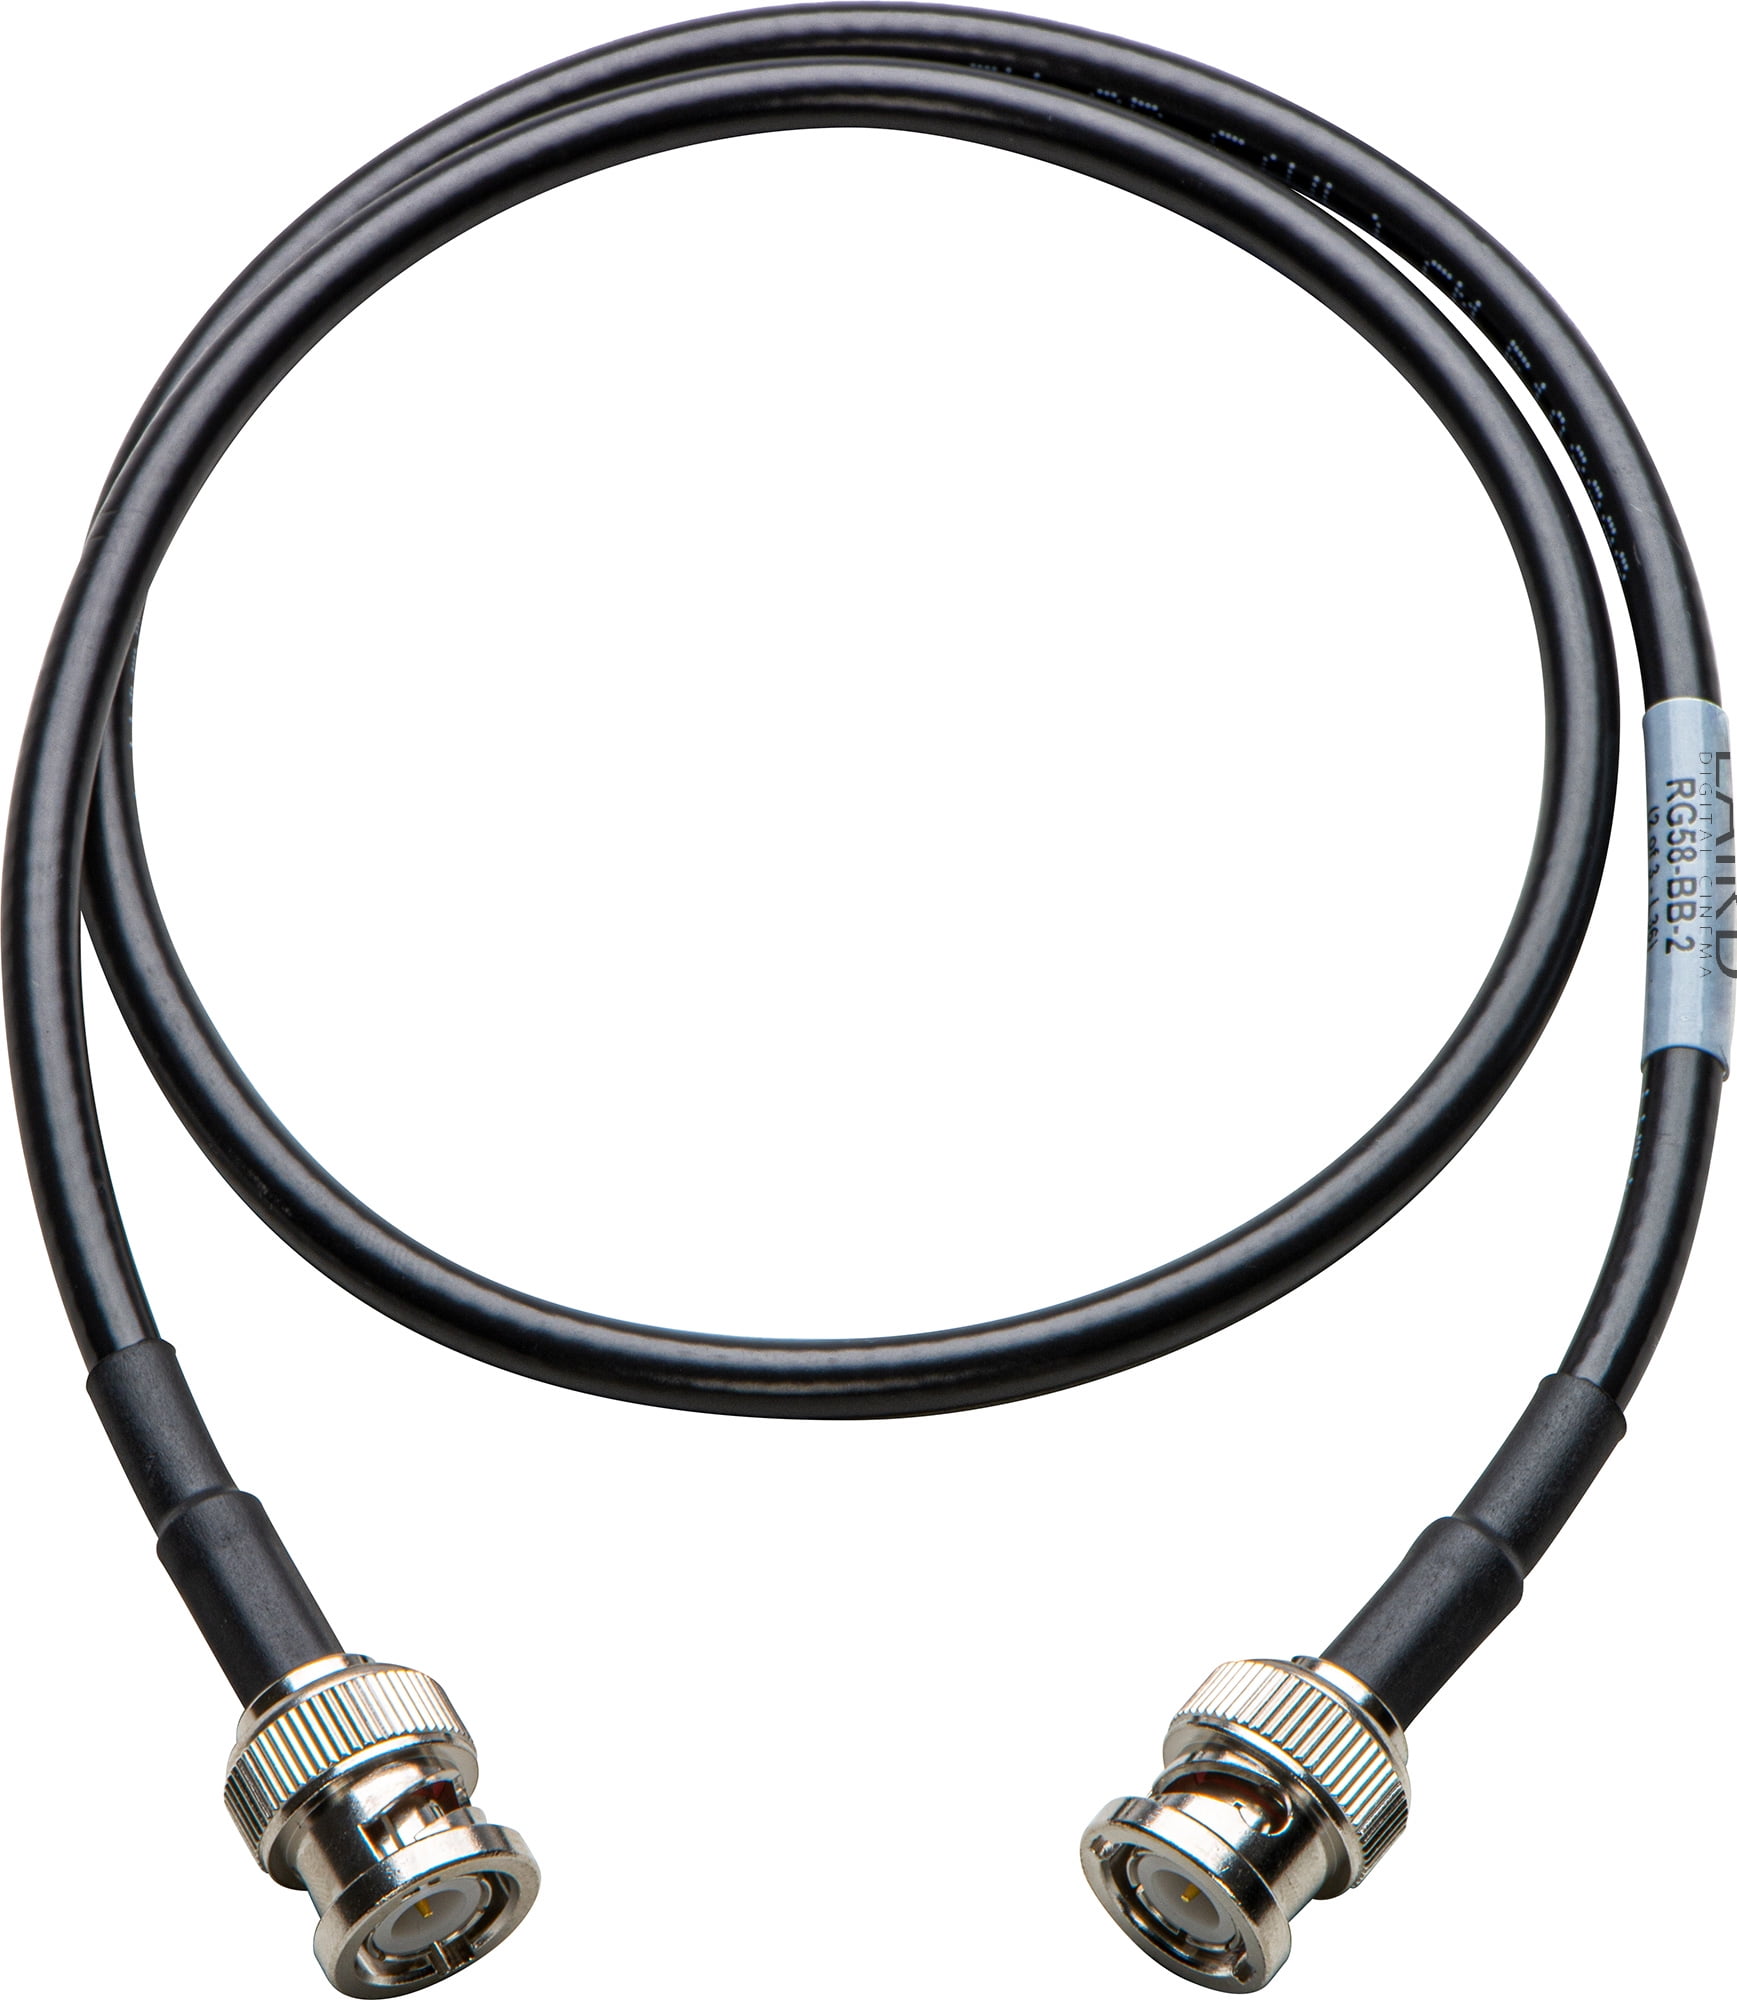 RG58A/U 50-Ohm Quality BNC Antenna/Network Coaxial Cable 